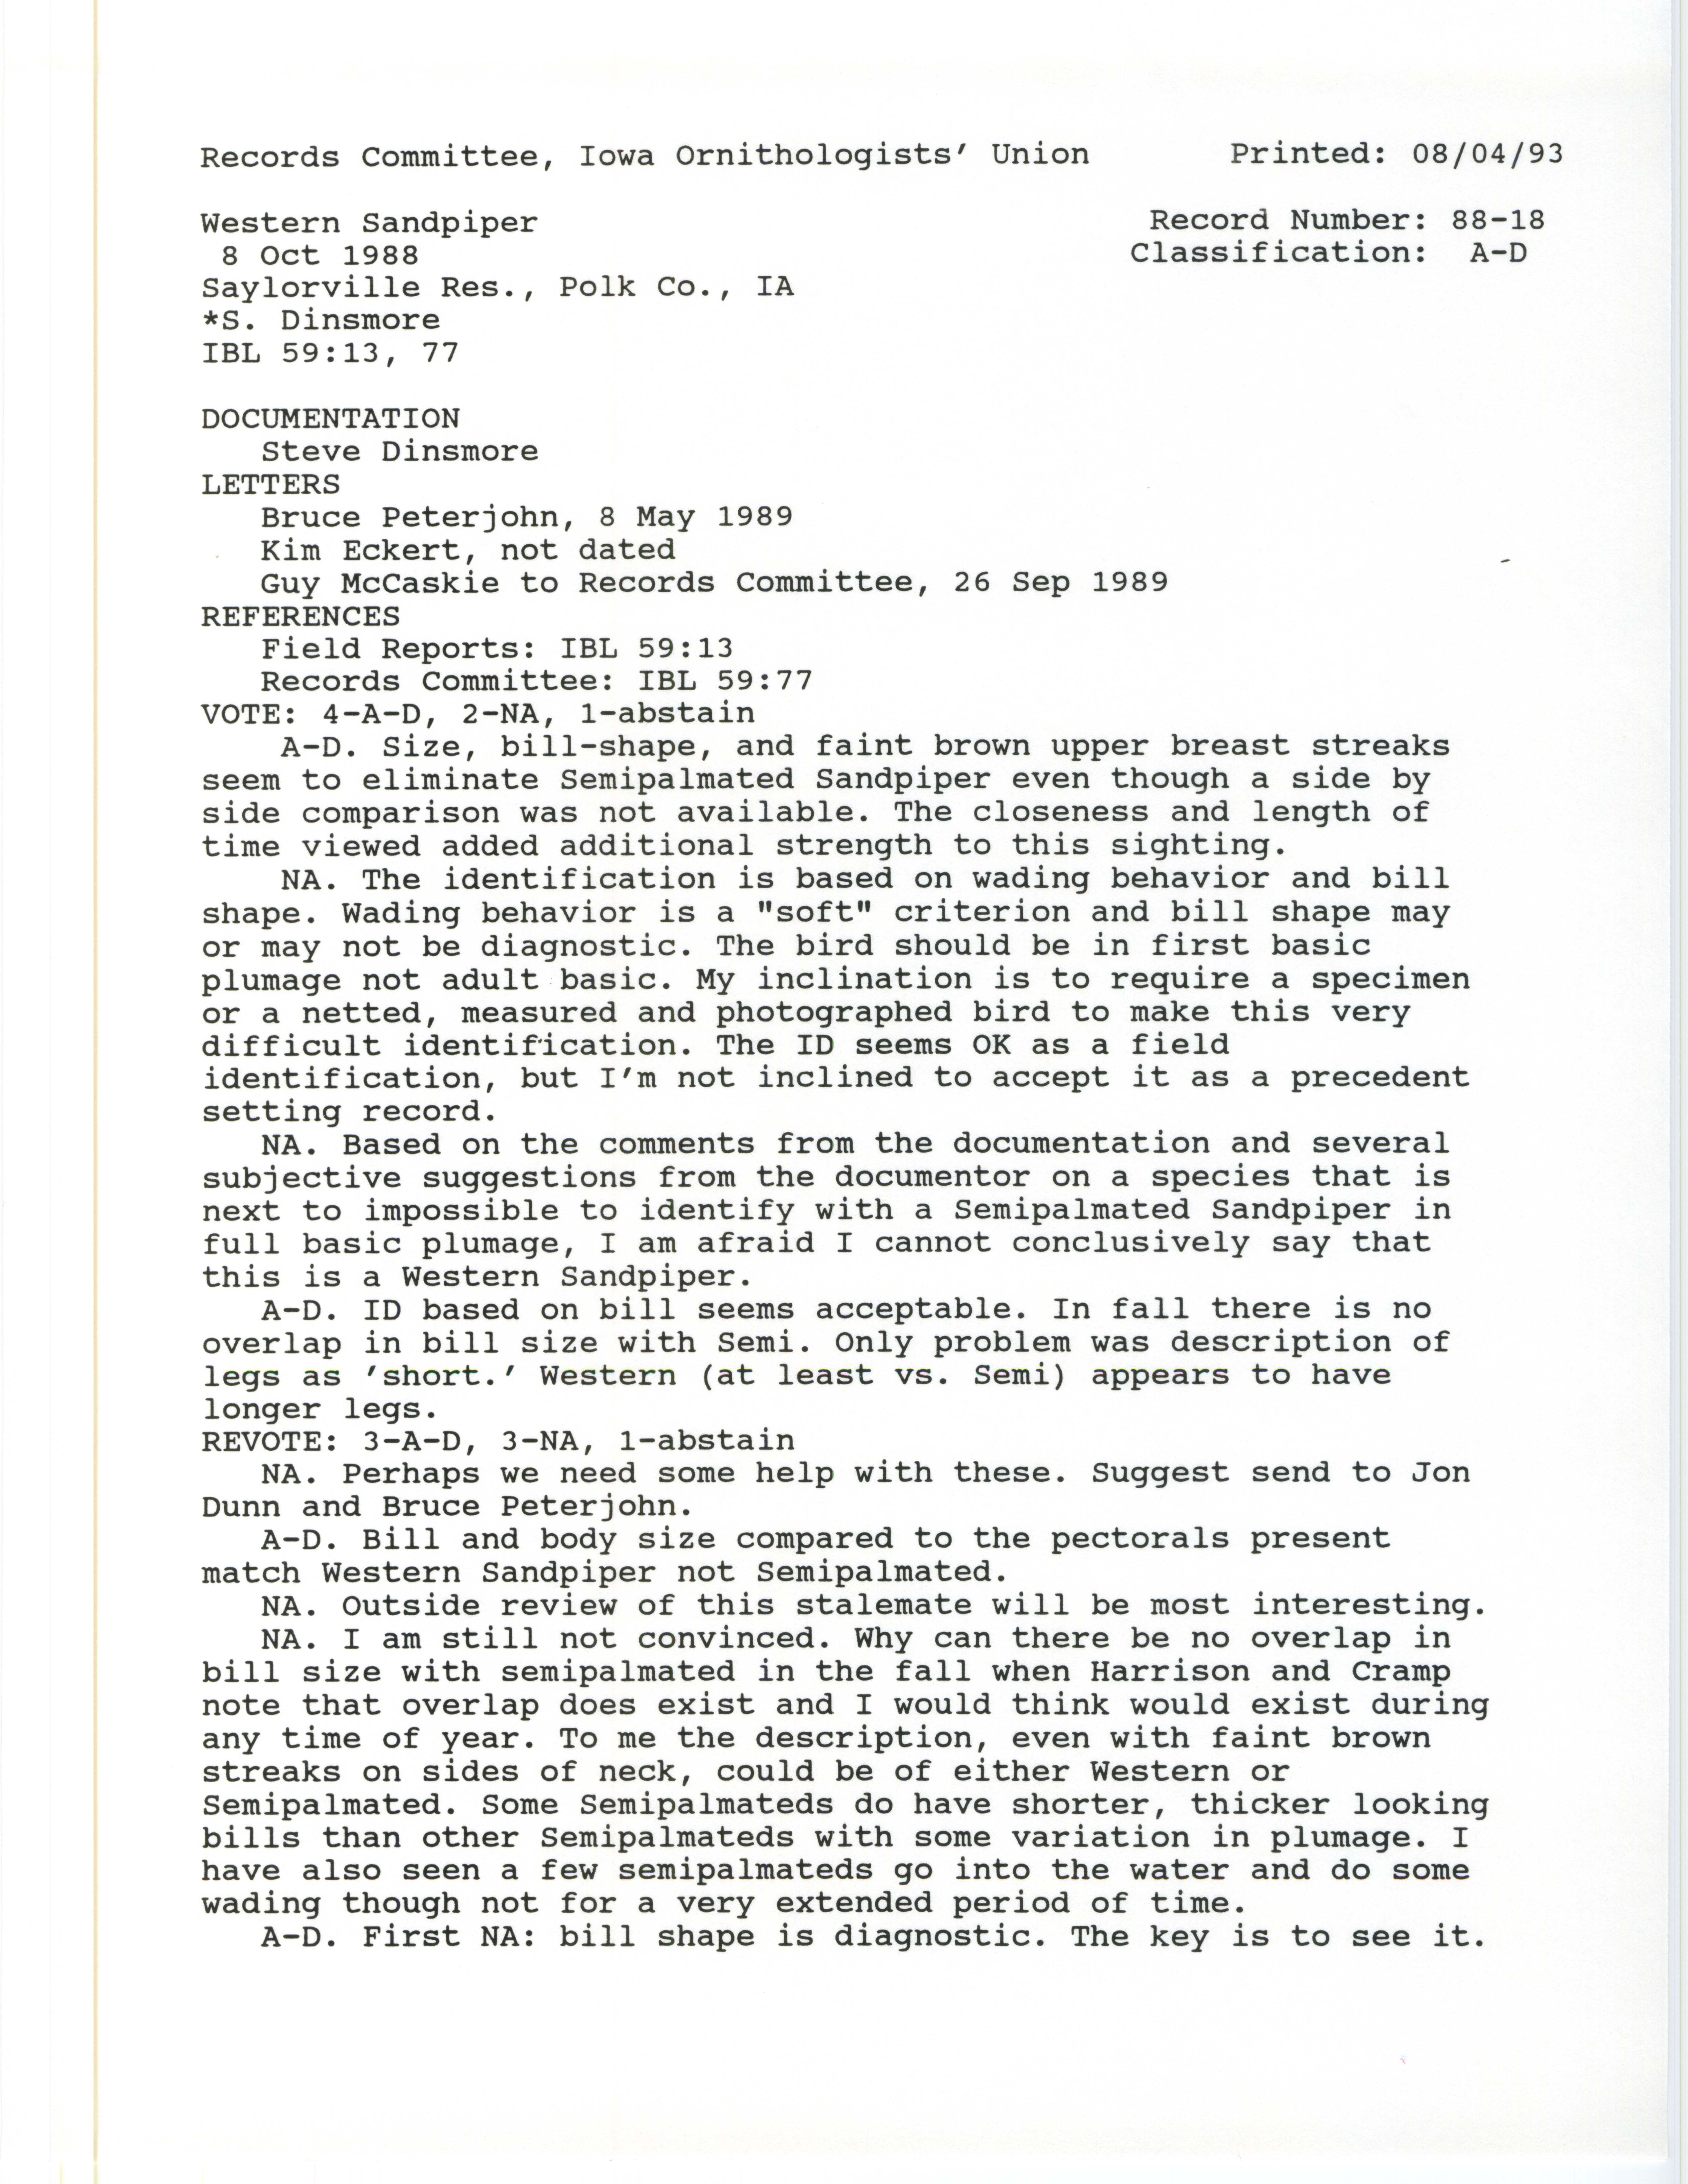 Records Committee review for rare bird sighting of Western Sandpiper at Saylorville Reservoir, 1988